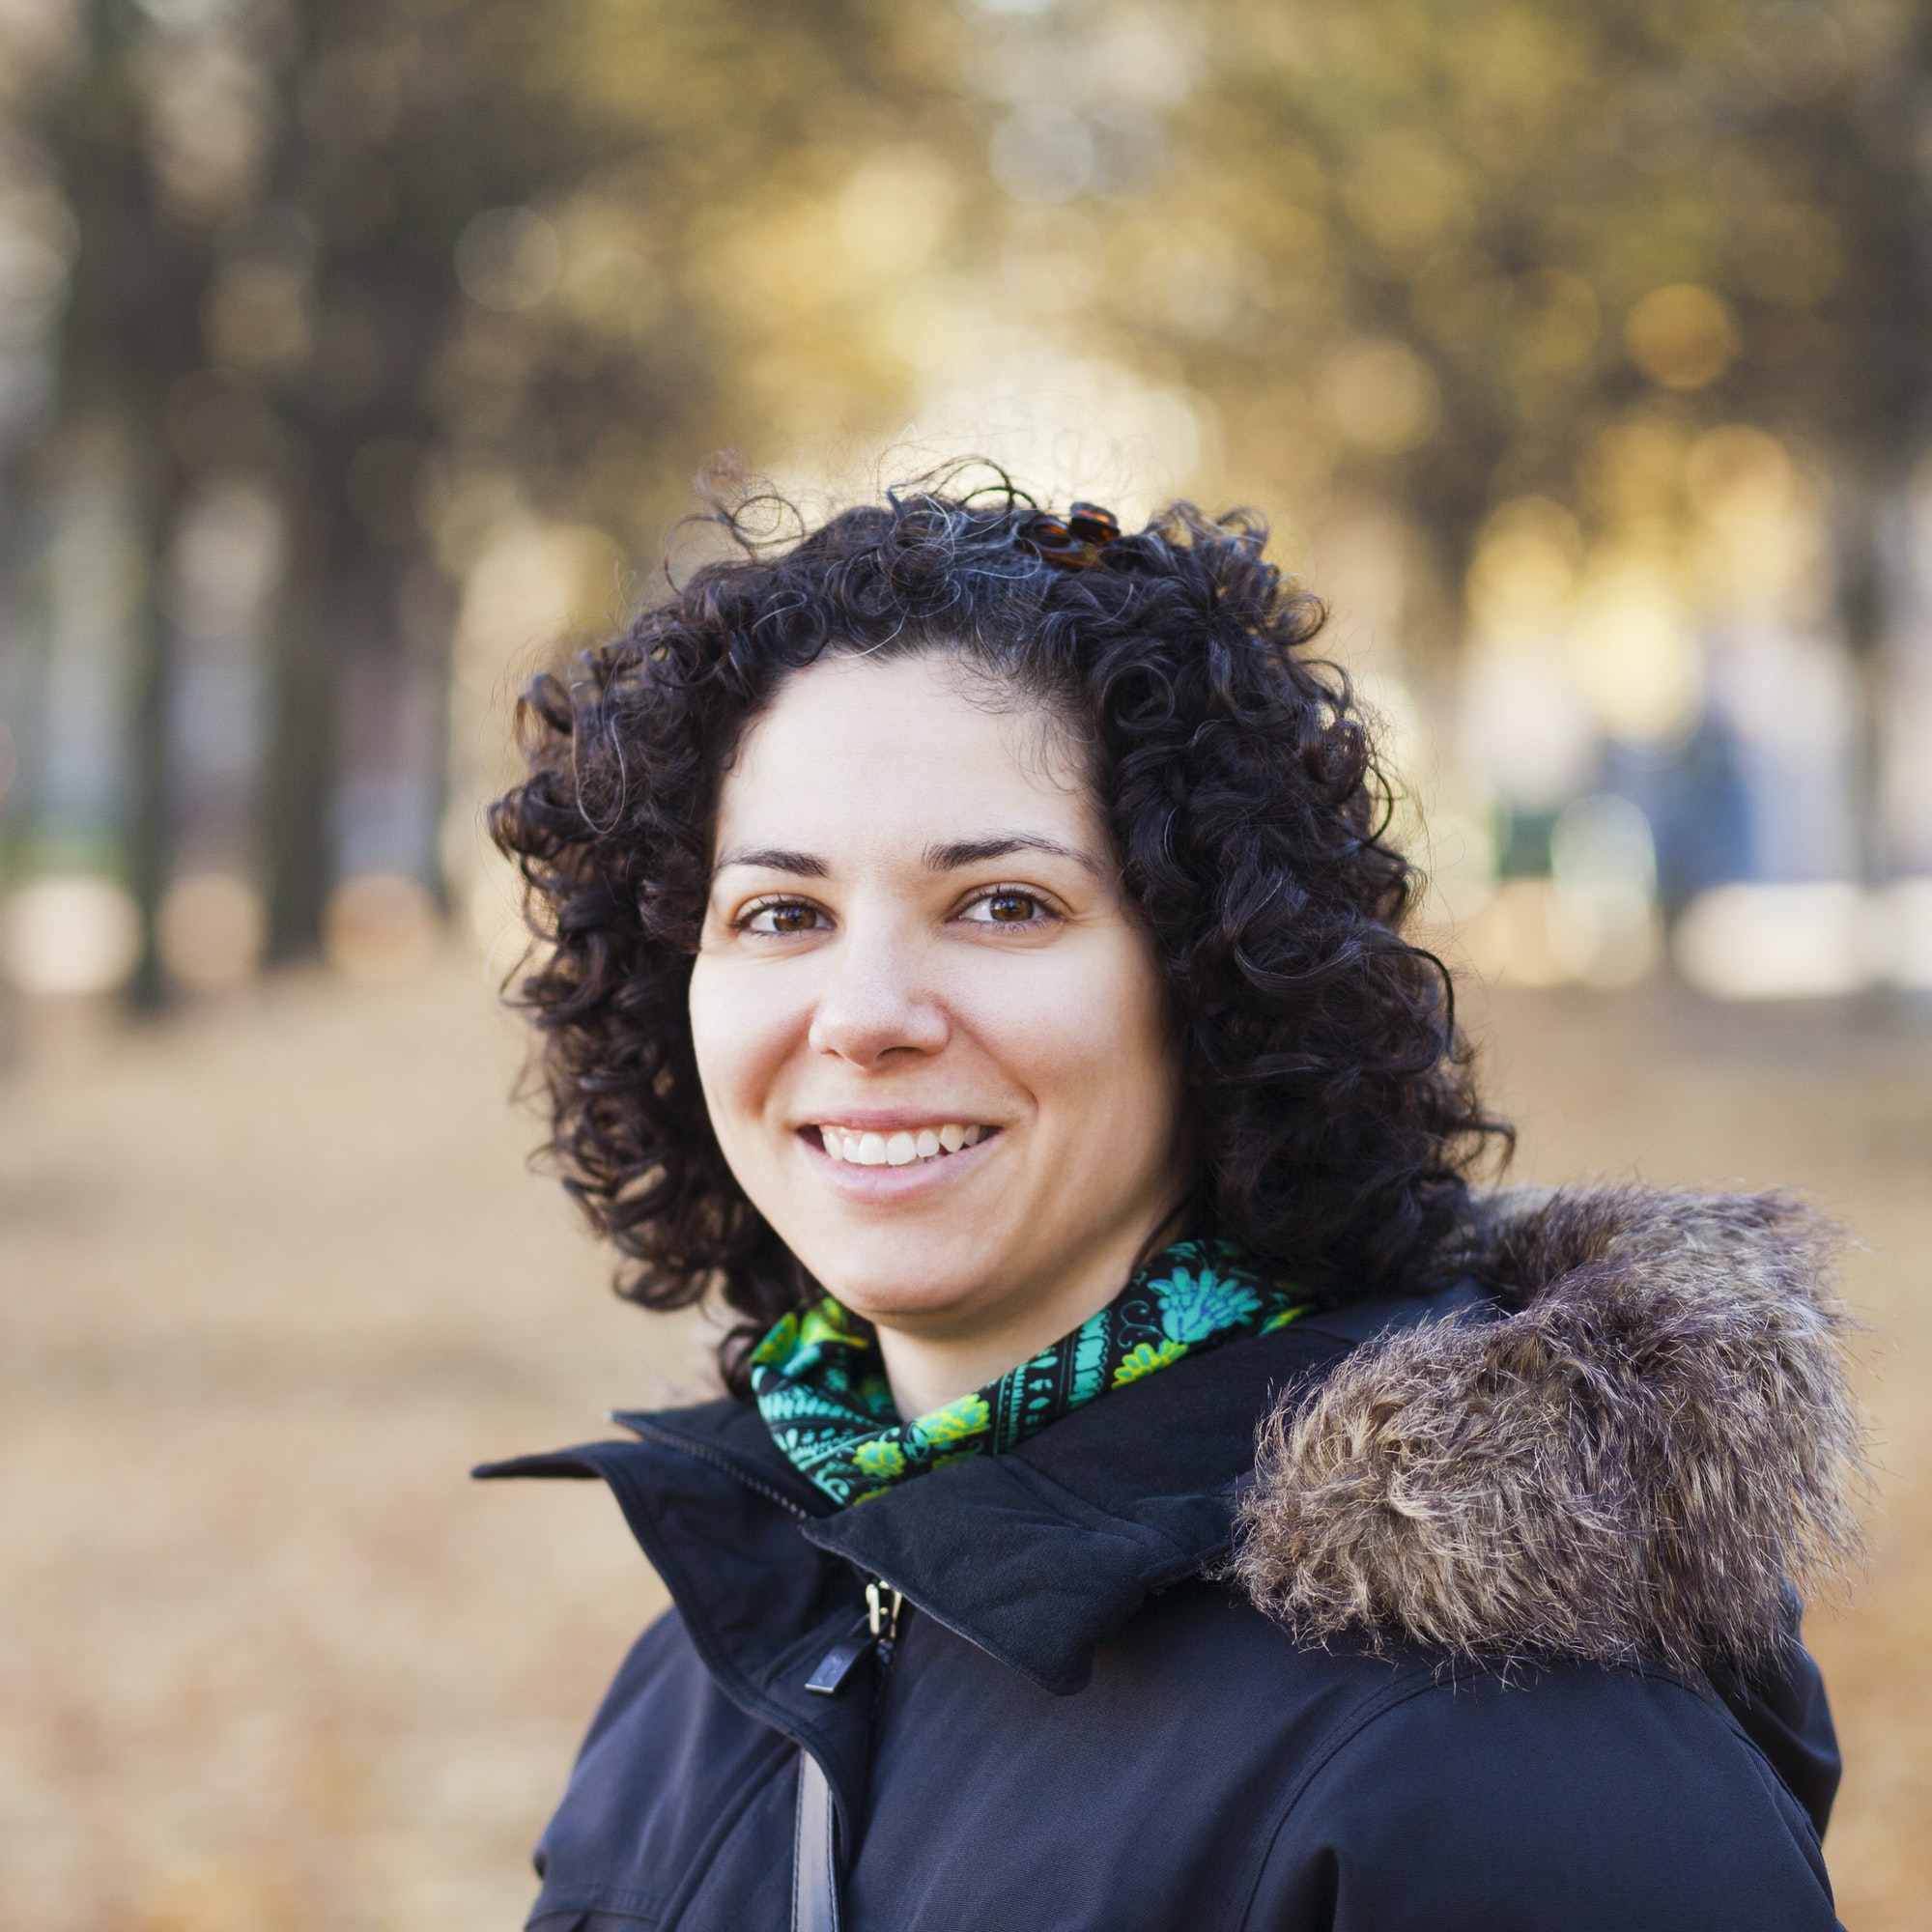 Portrait of happy woman with curly hair at park